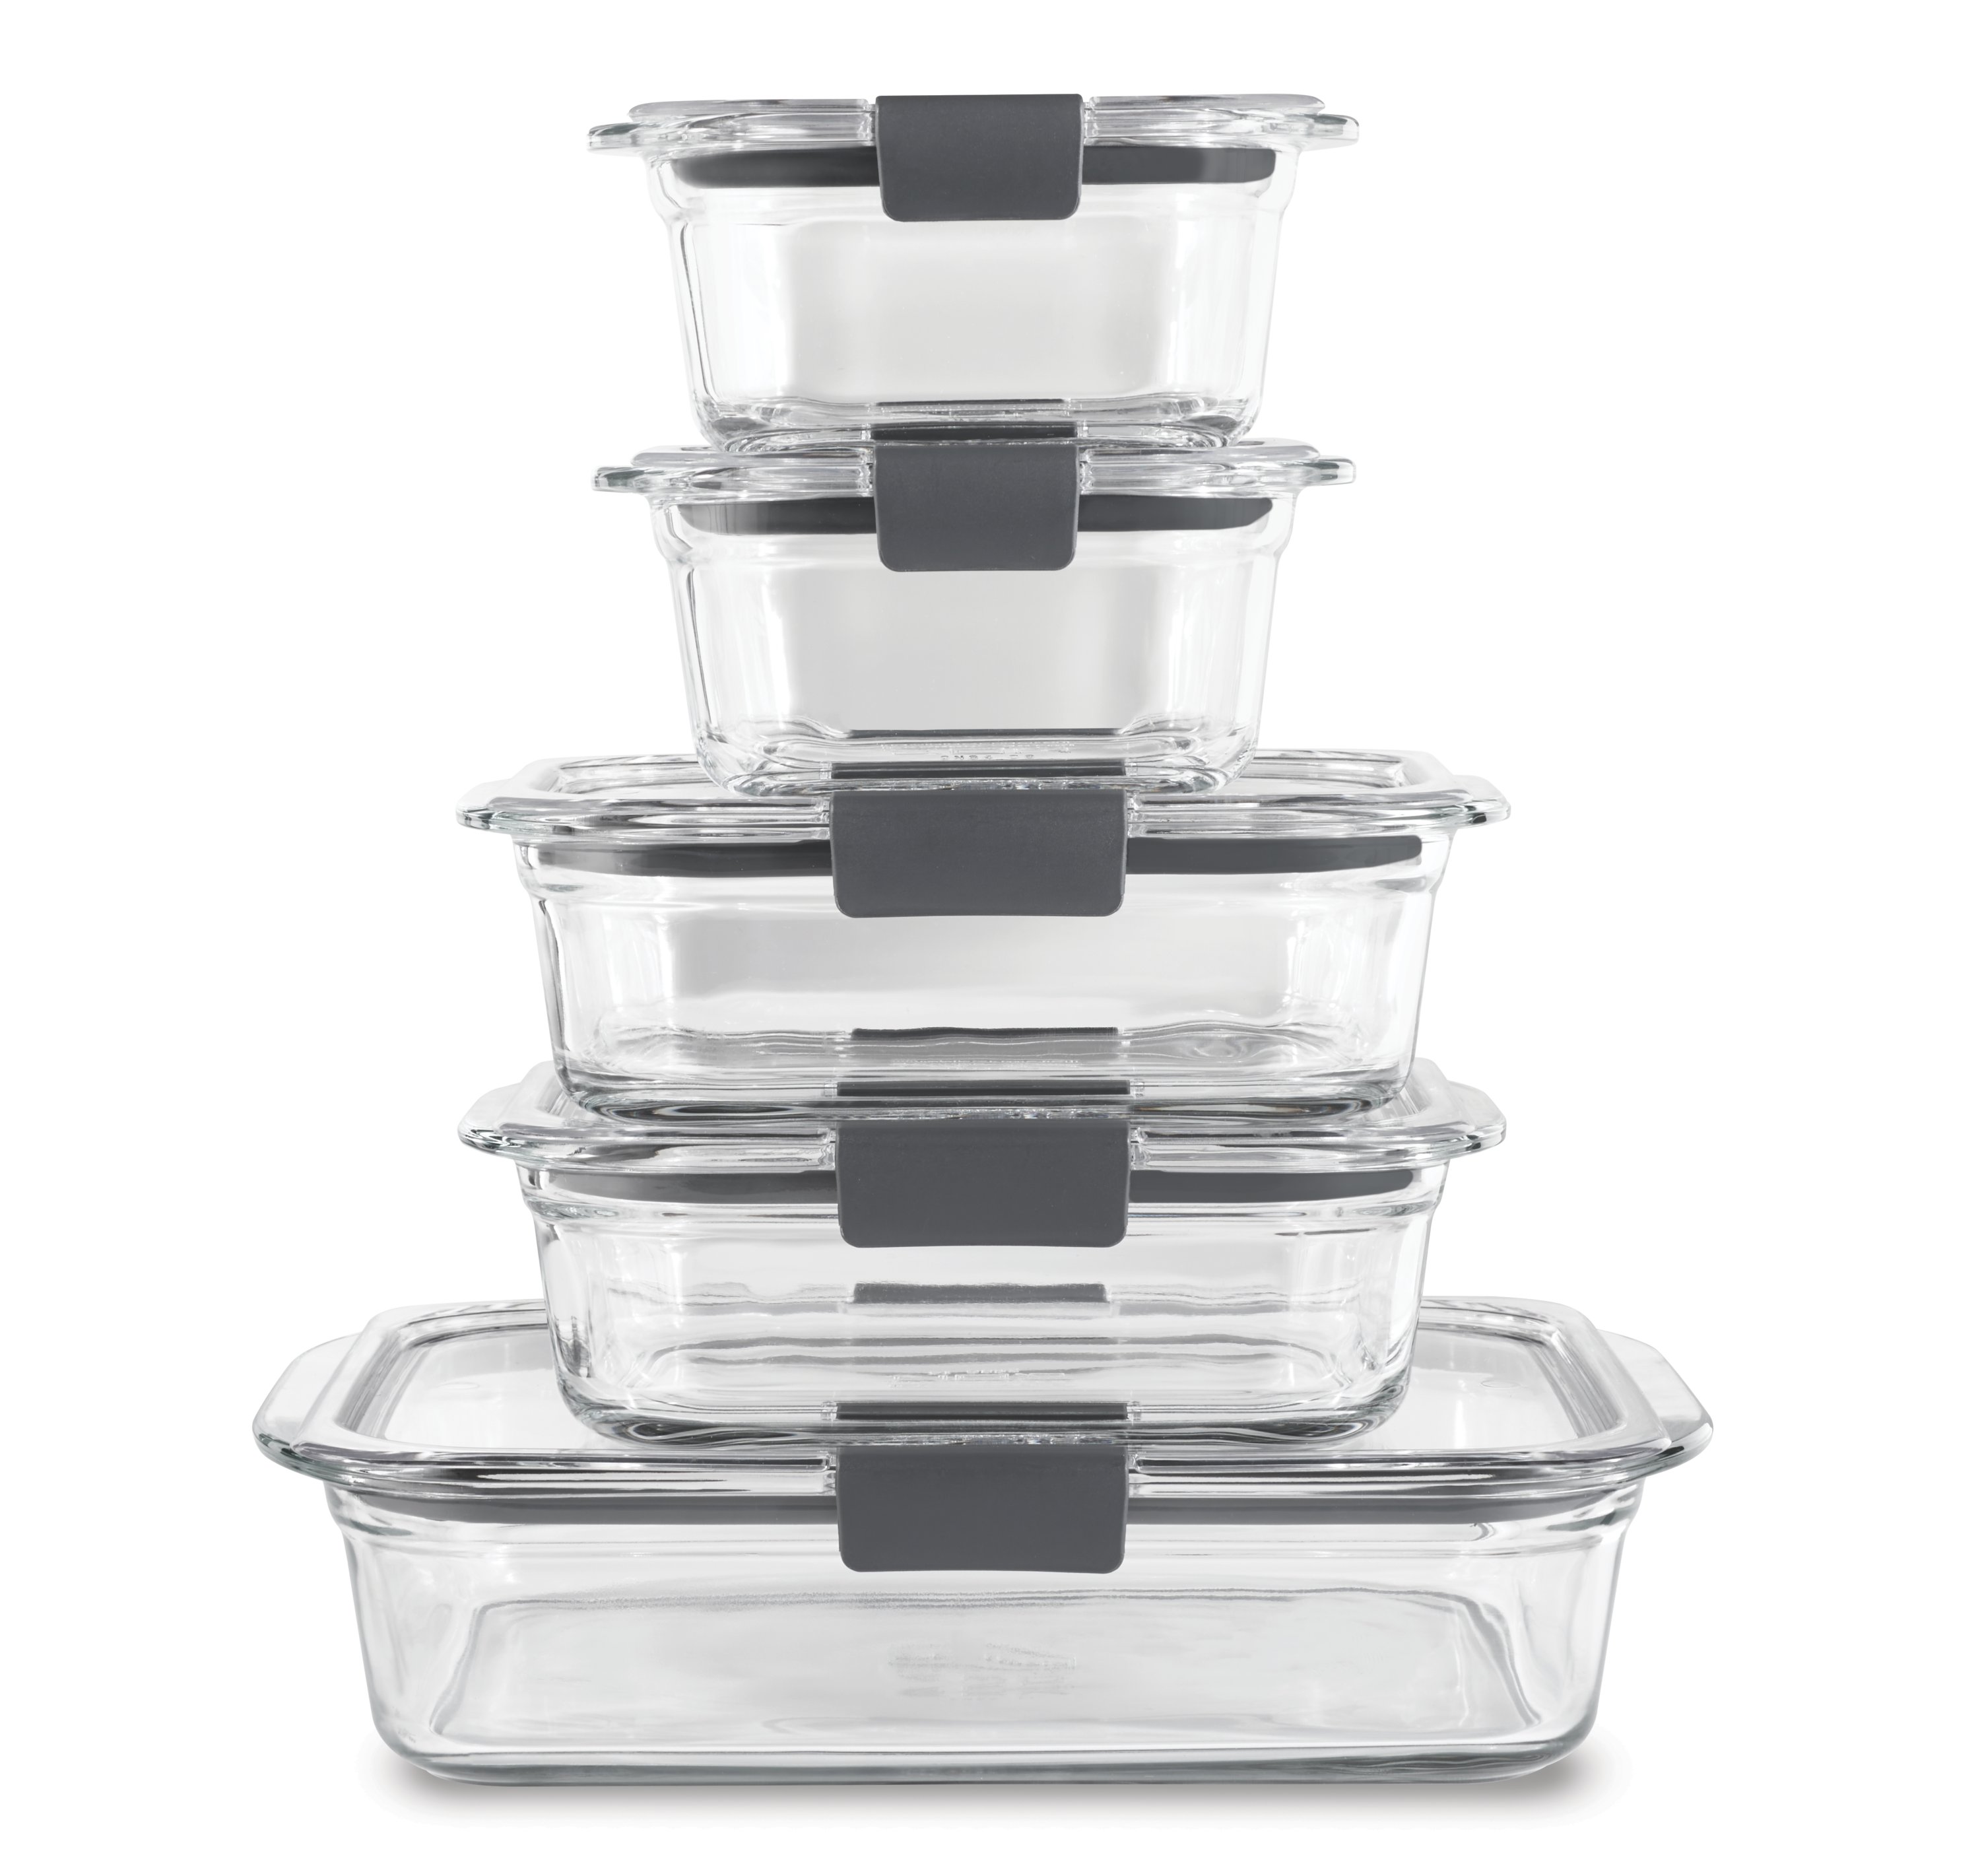 https://s7d9.scene7.com/is/image//NewellRubbermaid/2118303-rubbermaid-food-storage-brilliance-glass-clear-10pc-1.3c-3.2c-8c-straight-on